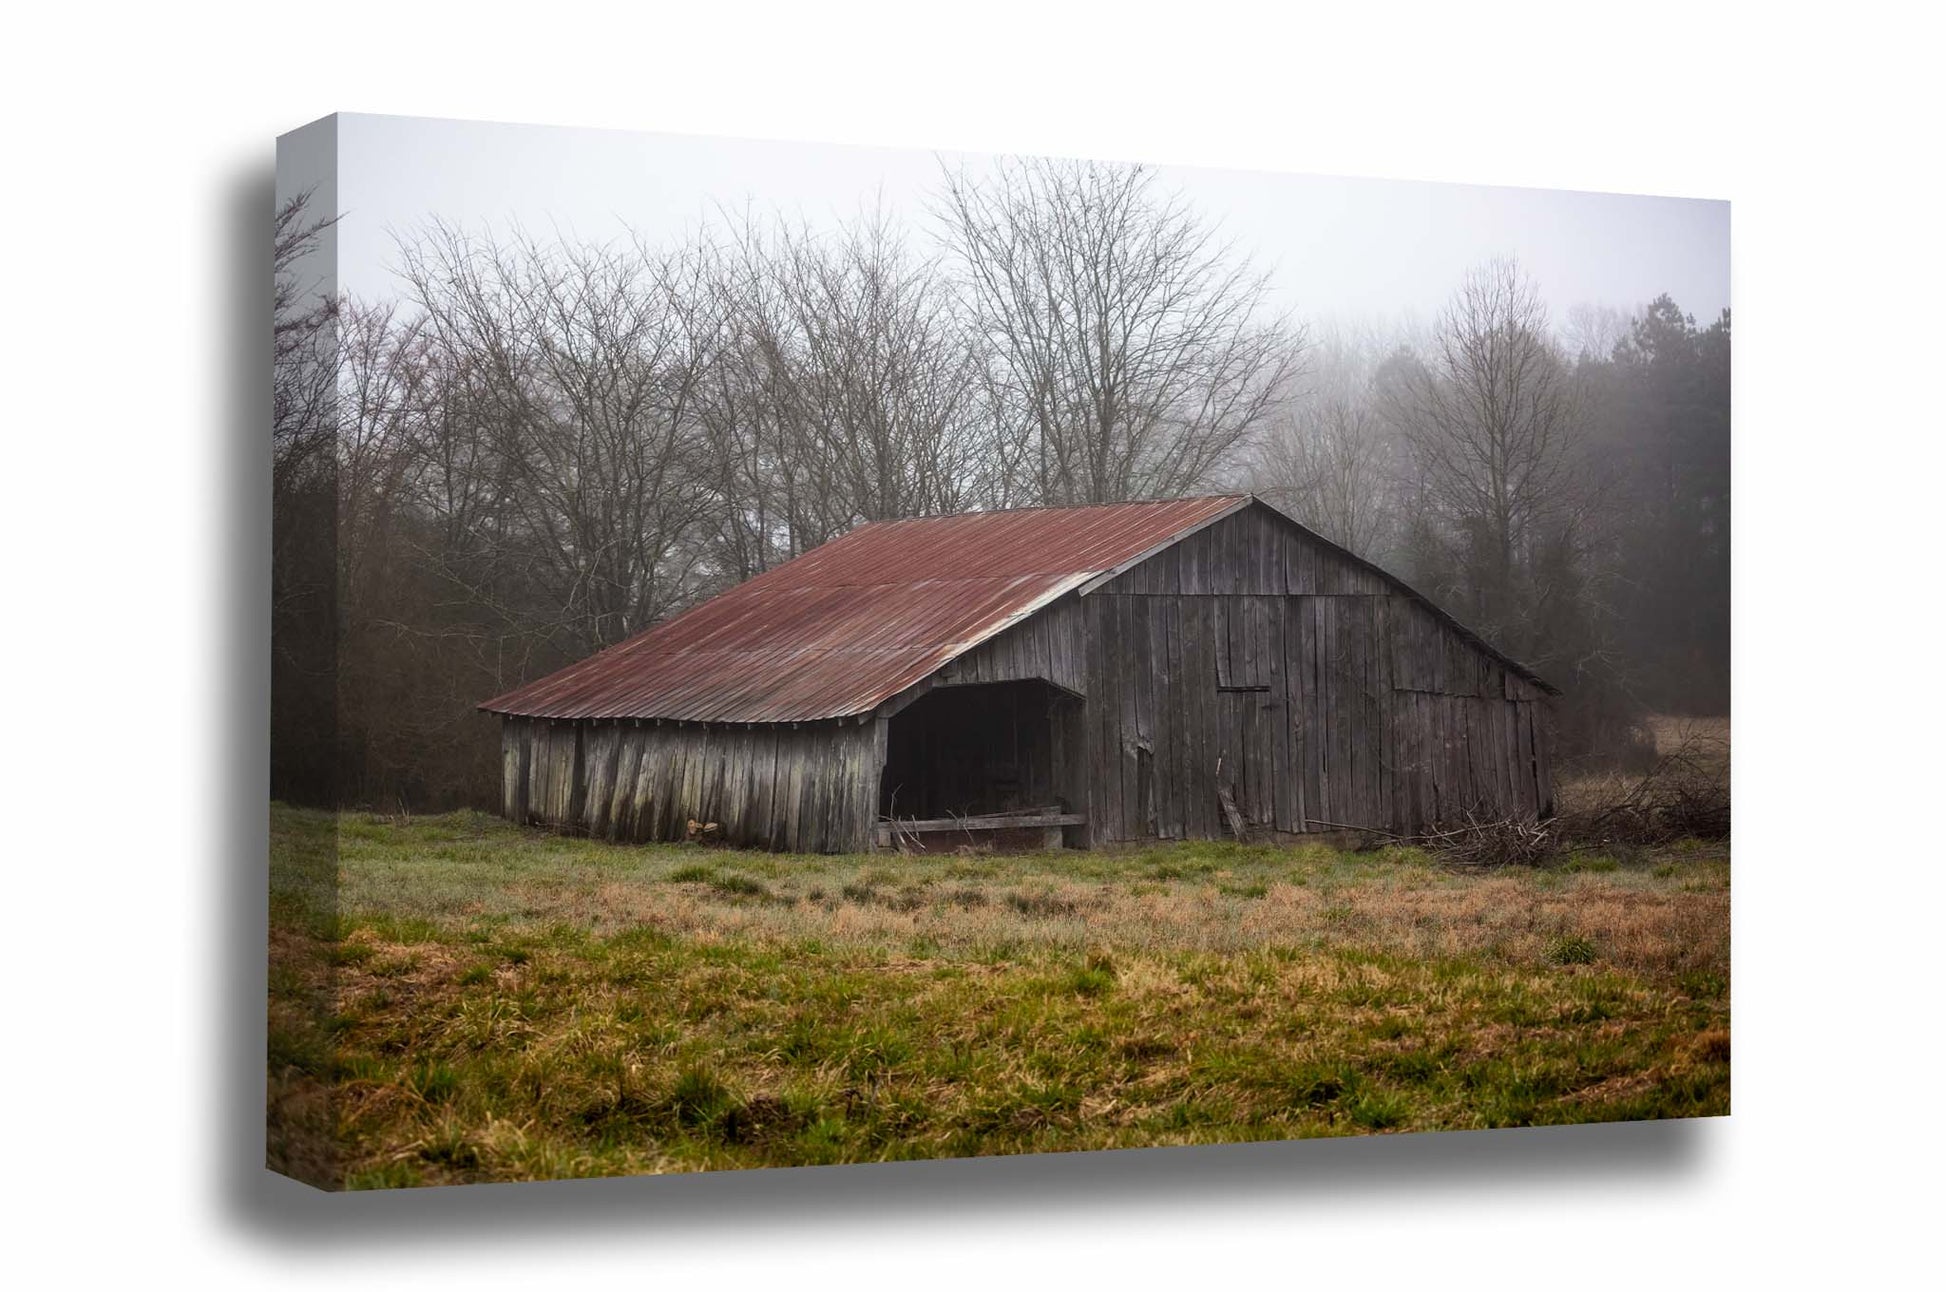 Country canvas wall art of an old wooden barn with a rusted tin roof on a foggy spring day in Arkansas by Sean Ramsey of Southern Plains Photography.